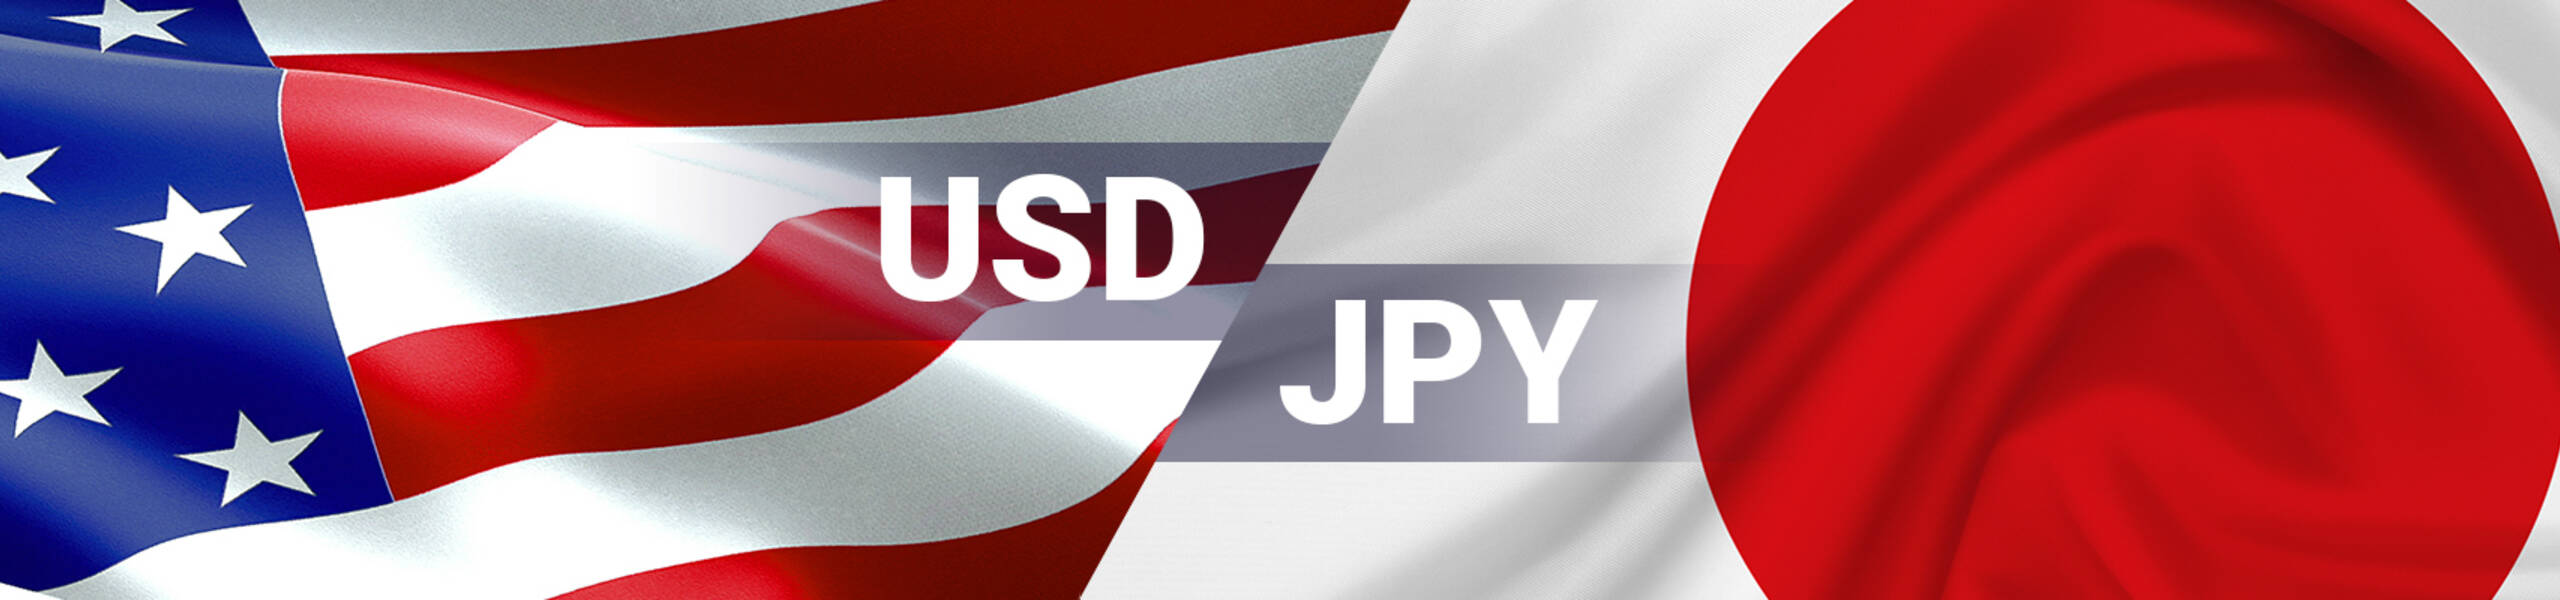 USD/JPY Dailyレポート 2018/07/03